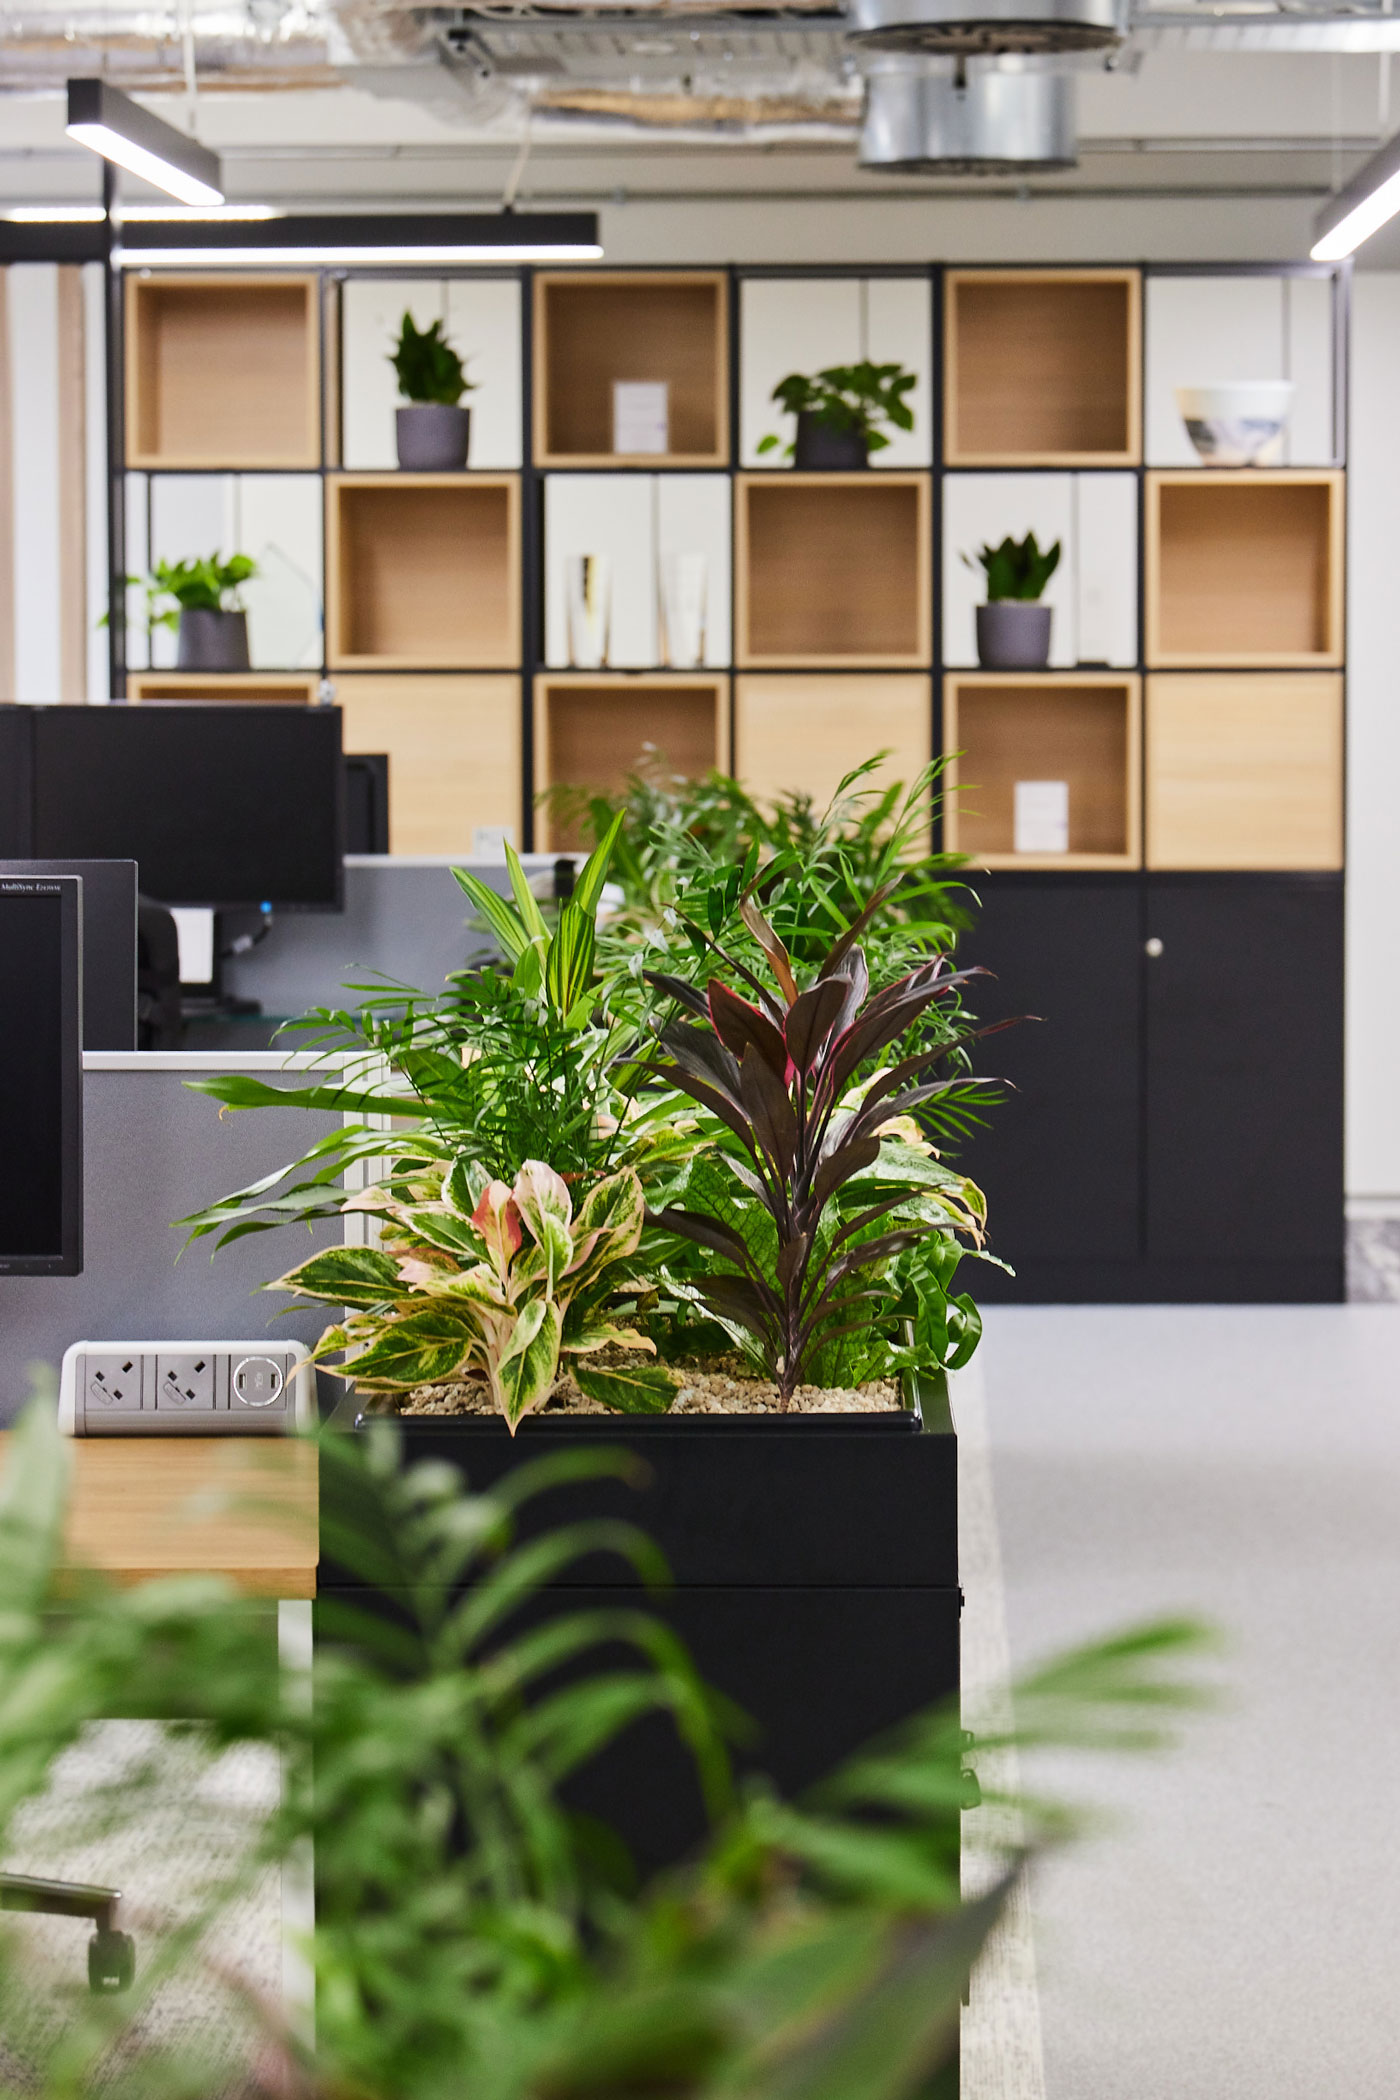 Biophilia within an office space to harness wellbeing in the workplace